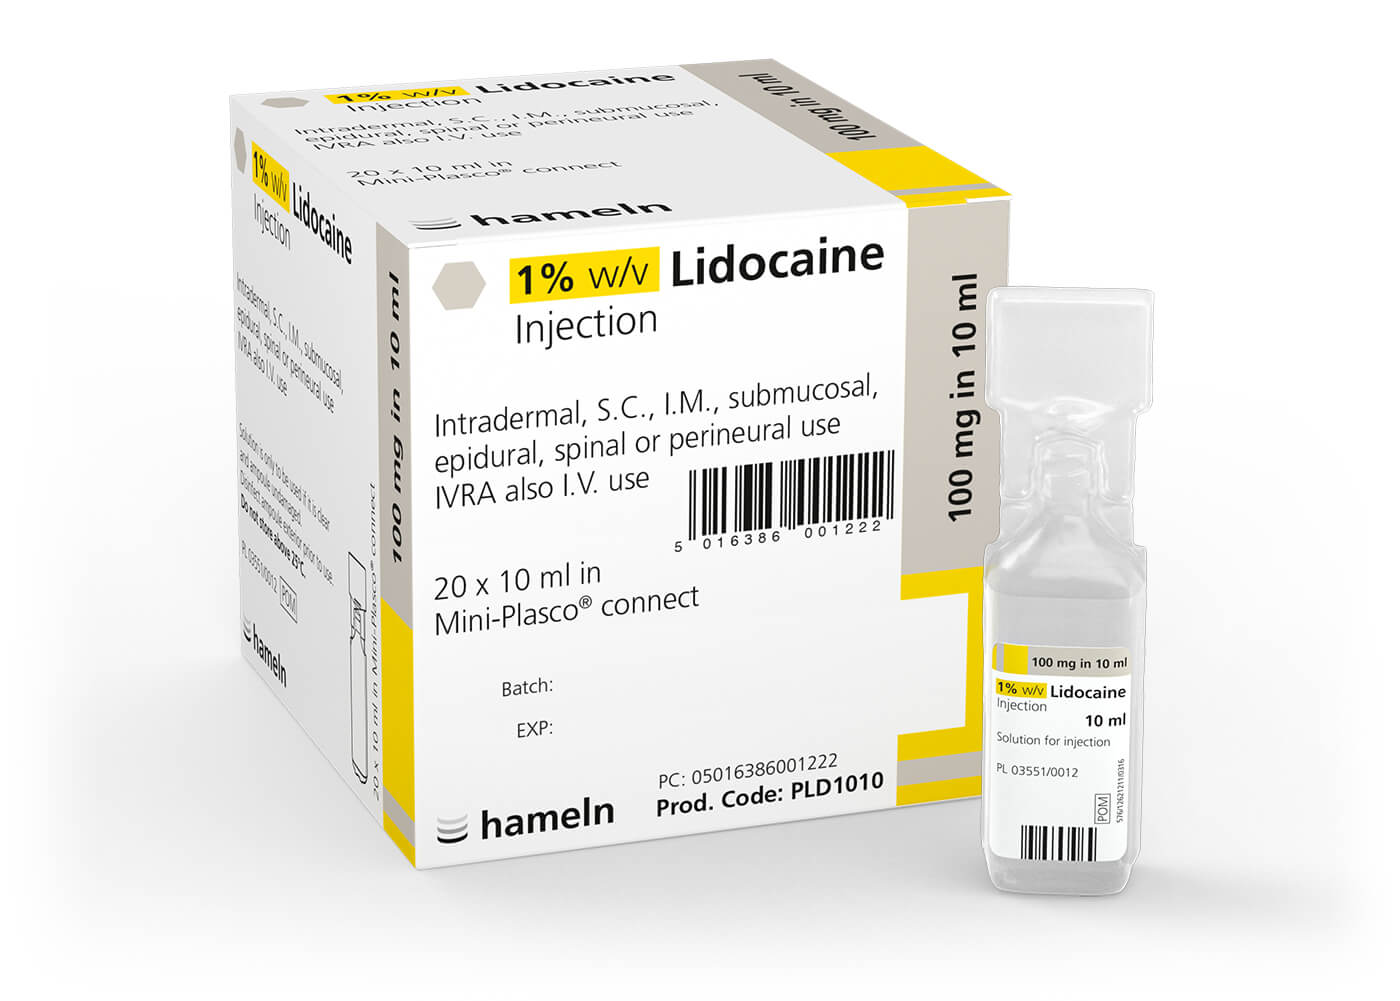 Lidocaine_UK_1pc_100_mg_in_10_ml_Pack_20_St_2021